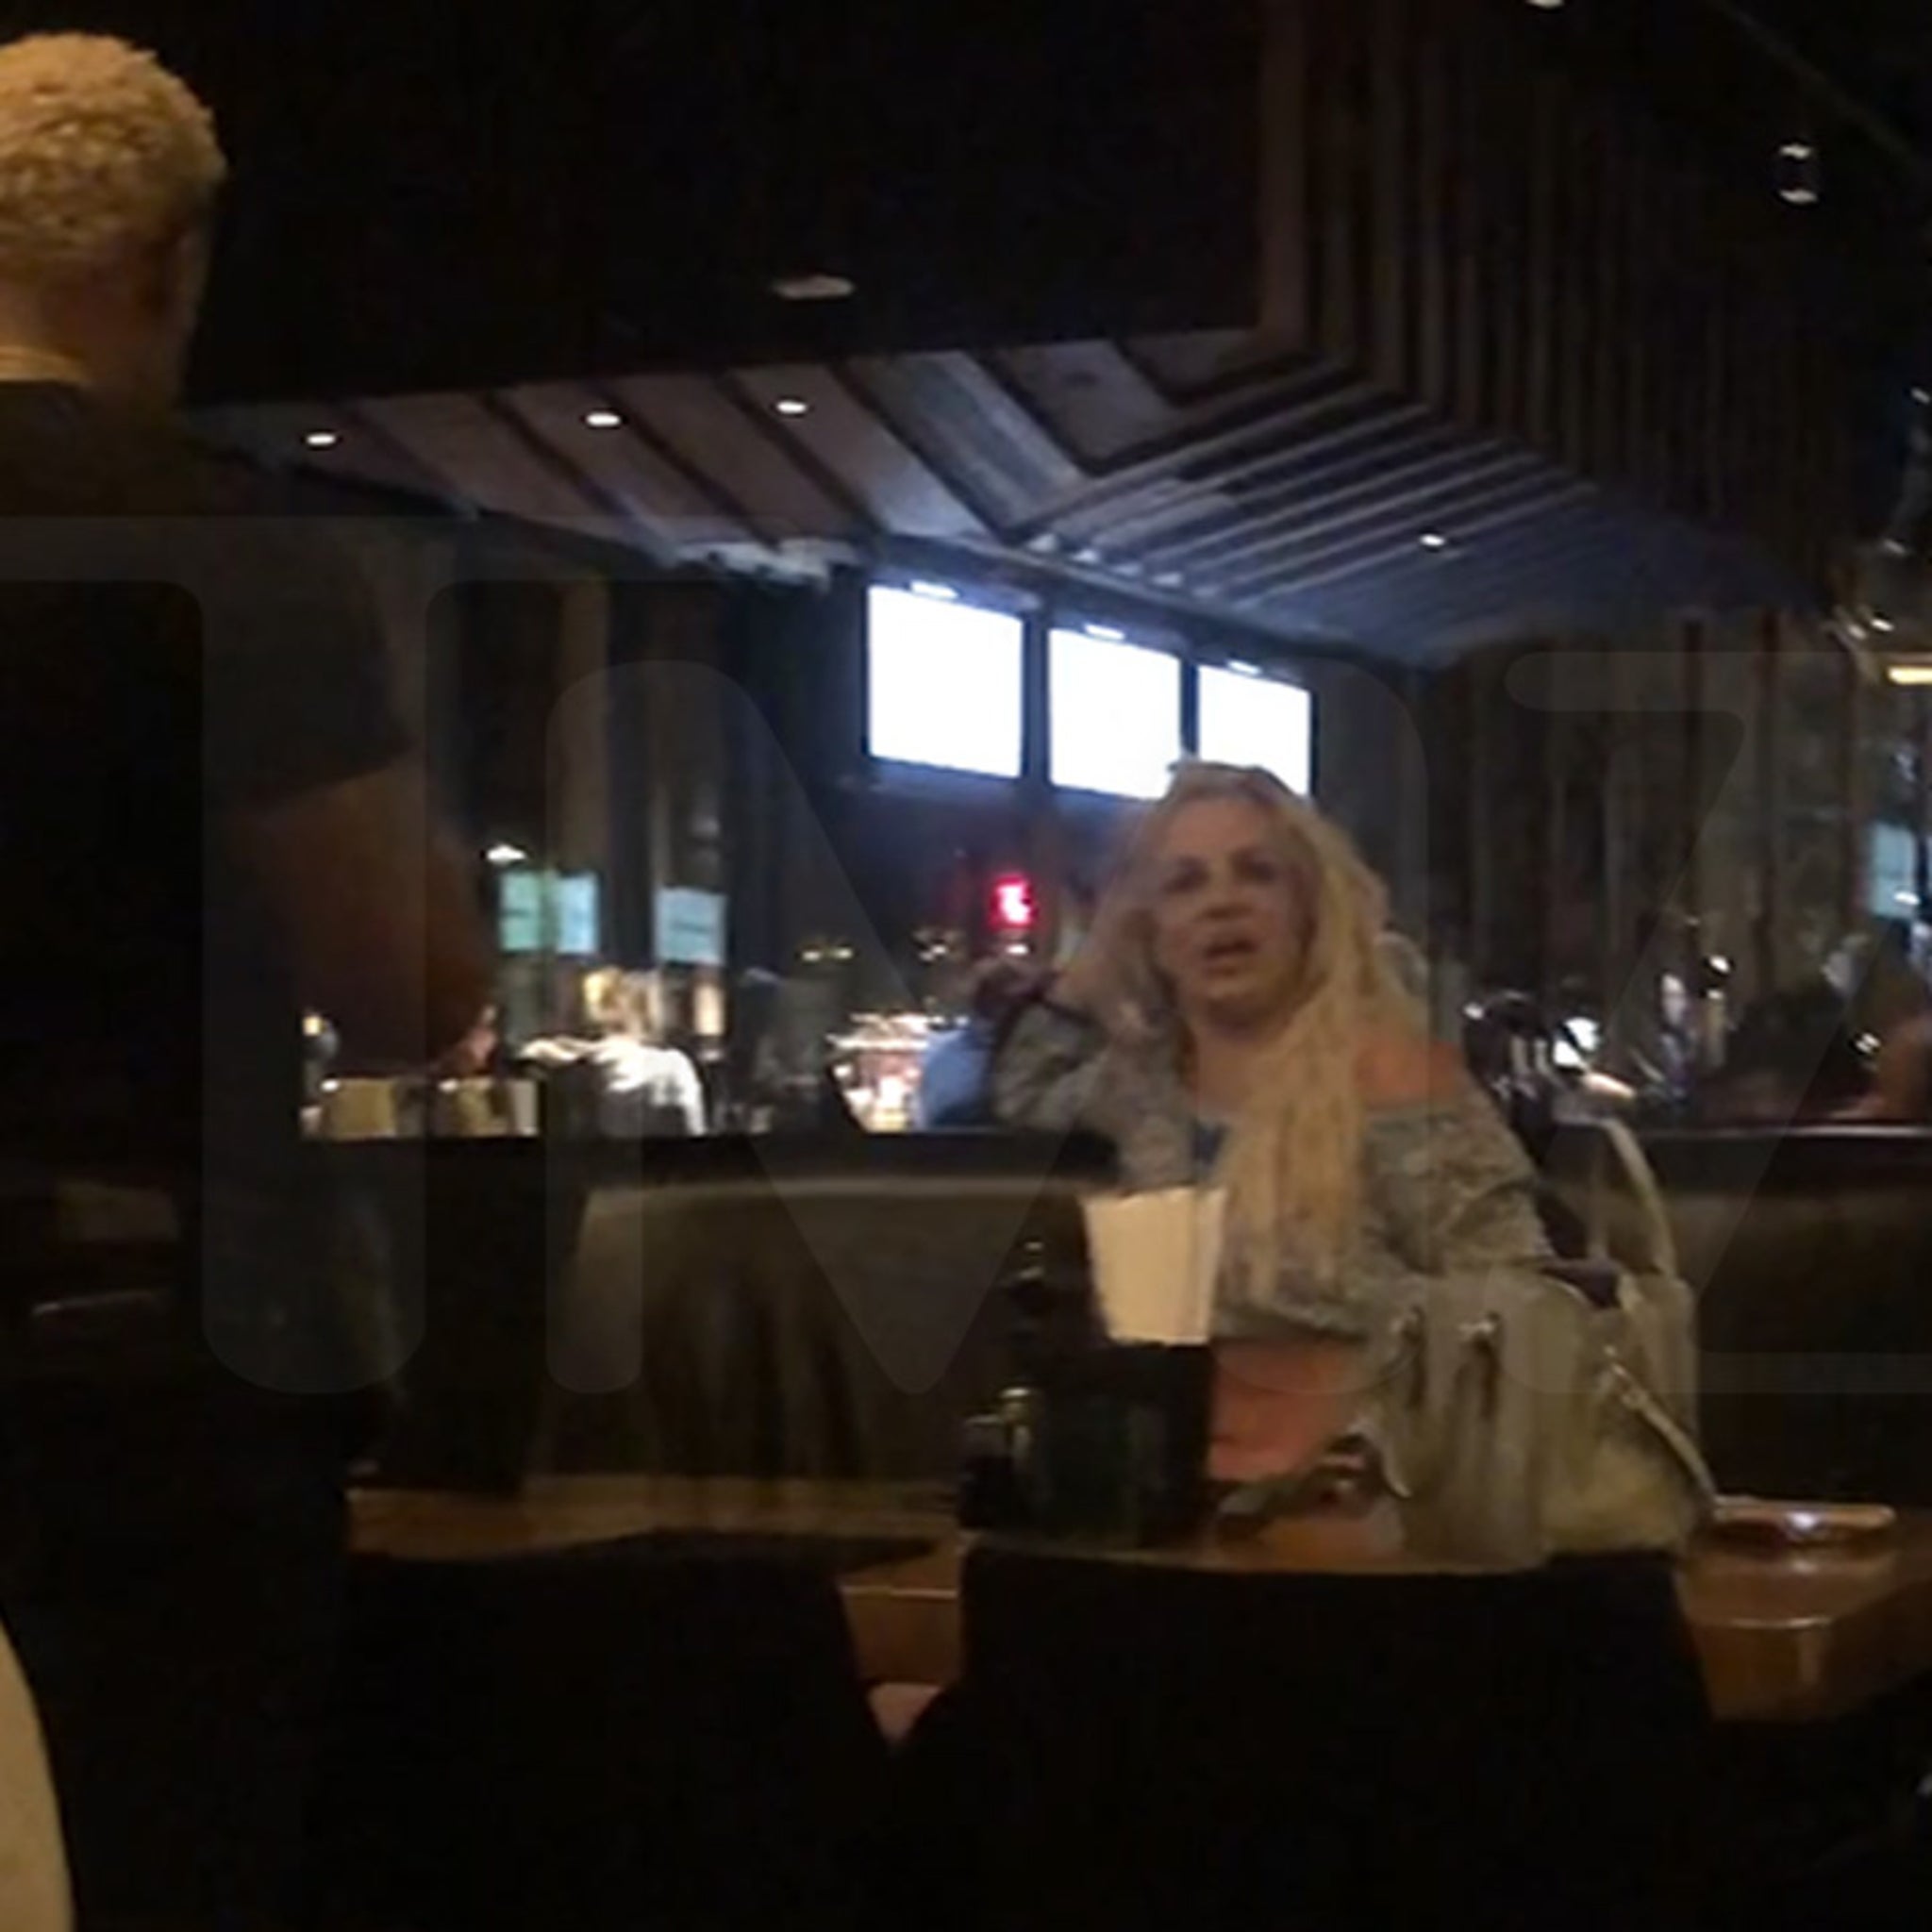 Britney Spears Acting 'Manic' in Restaurant, Husband Sam Storms Off